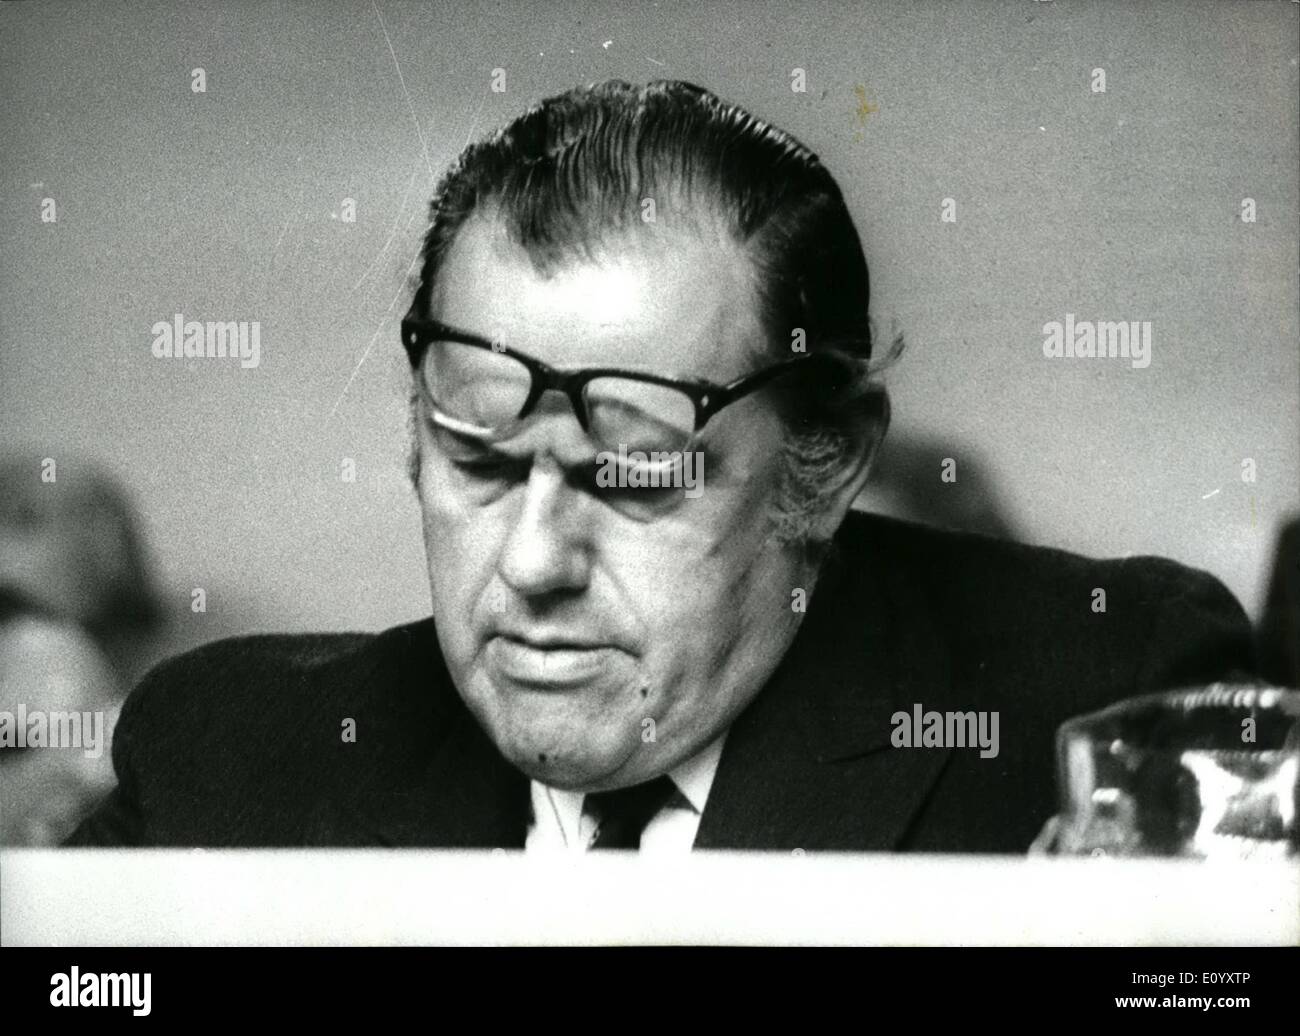 Oct. 10, 1971 - The Conservative party conference at Brighton.: The Conservative Party Conference at Brighton today called for the reintroduction of the death penalty for the murderers of policemen. Photo shows with his spectacles resting on his forehead Mr. Reginald Maudling, the Home Secretary, listens as the Tories demand the return of the death penalty. Stock Photo